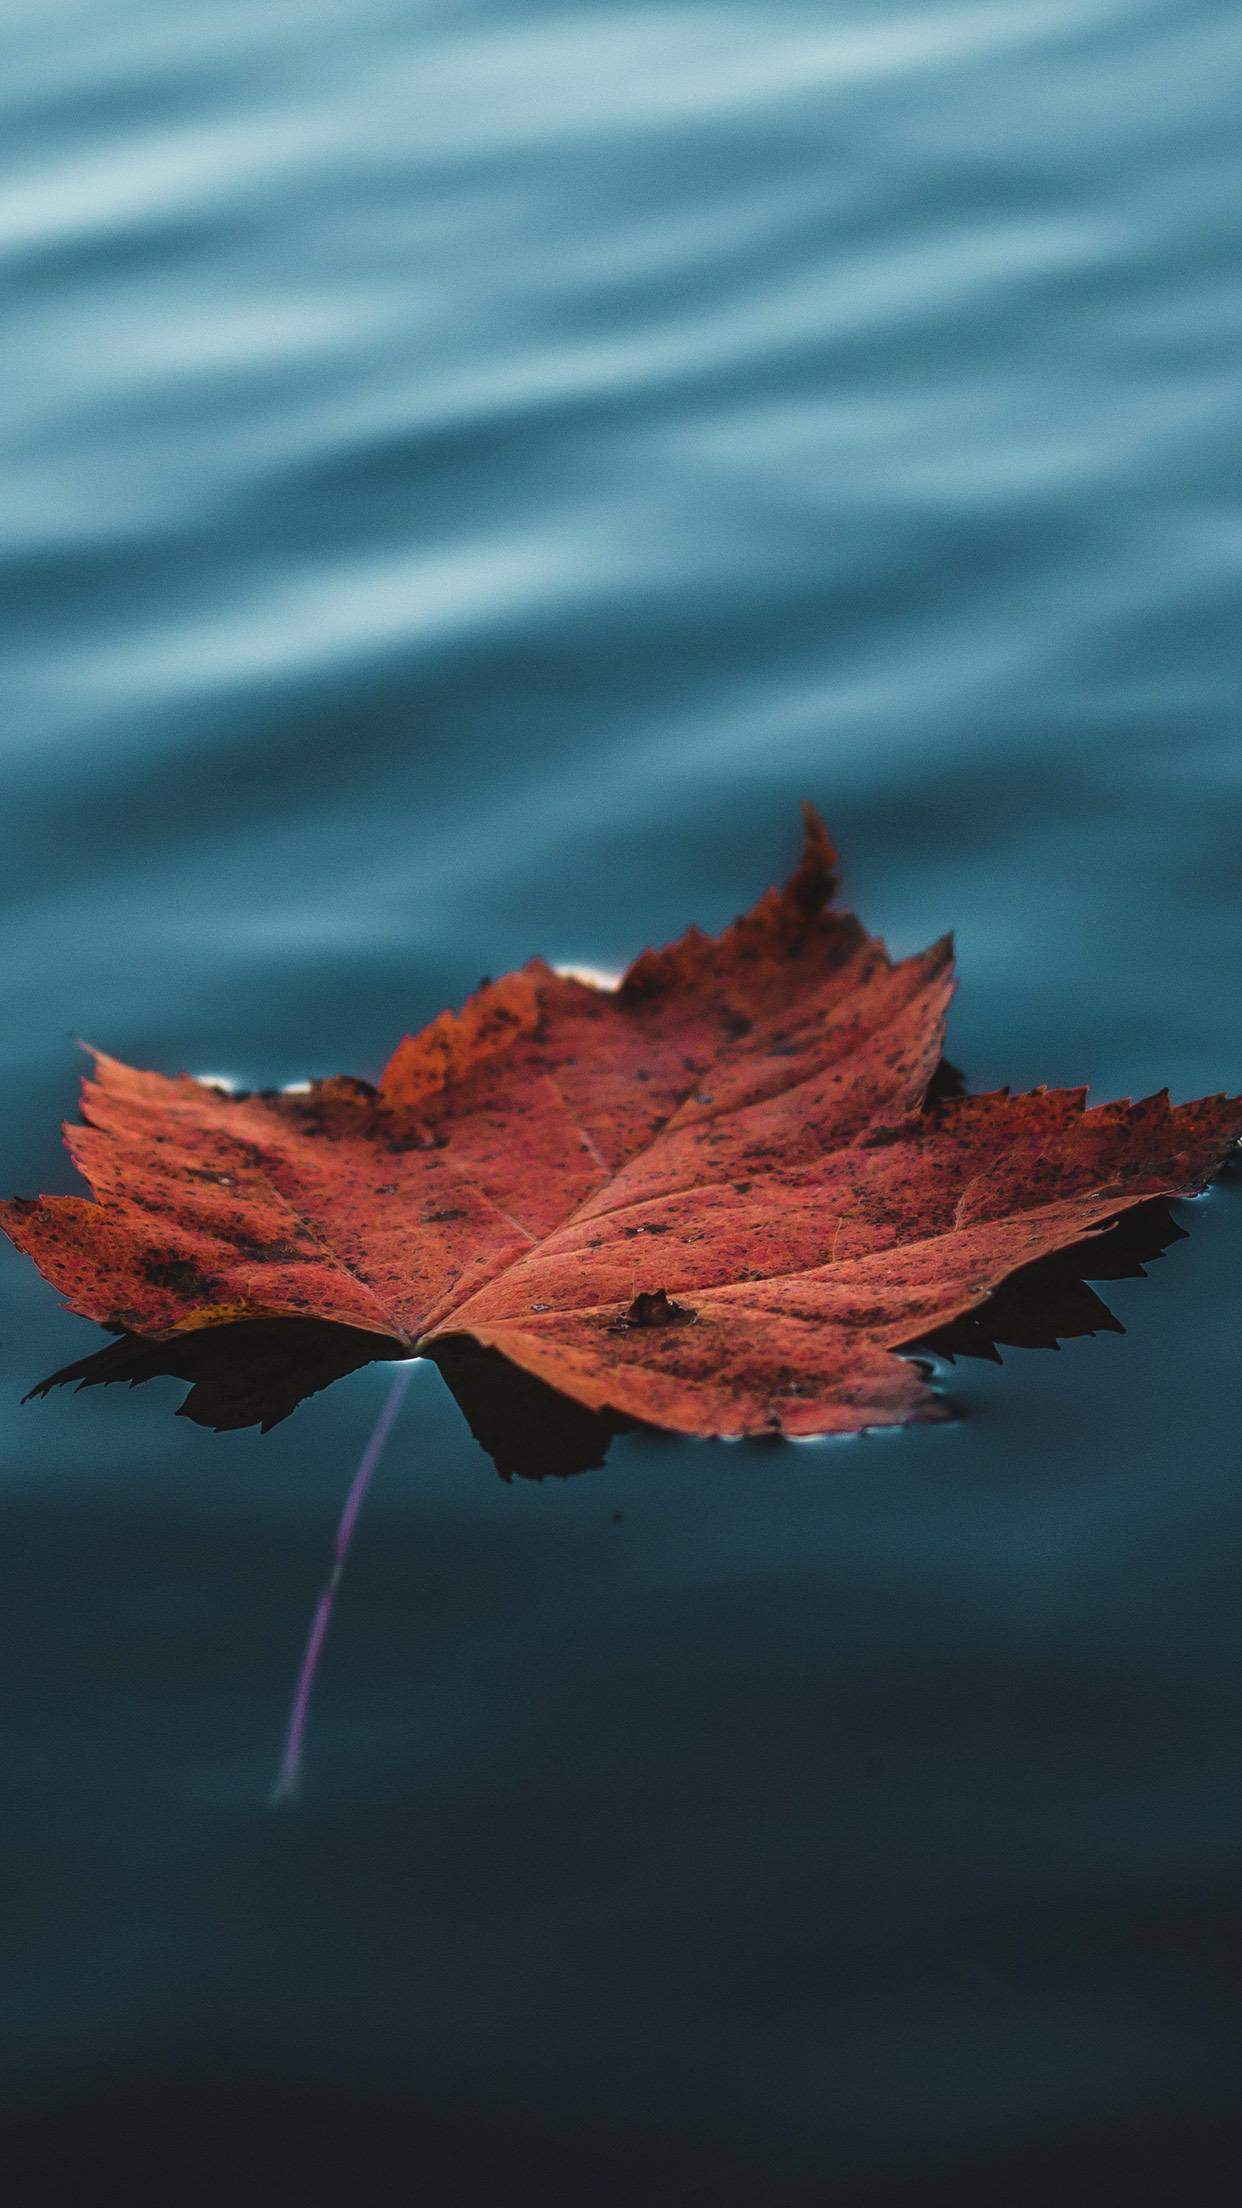 Leaf On The Water - HD Wallpaper 